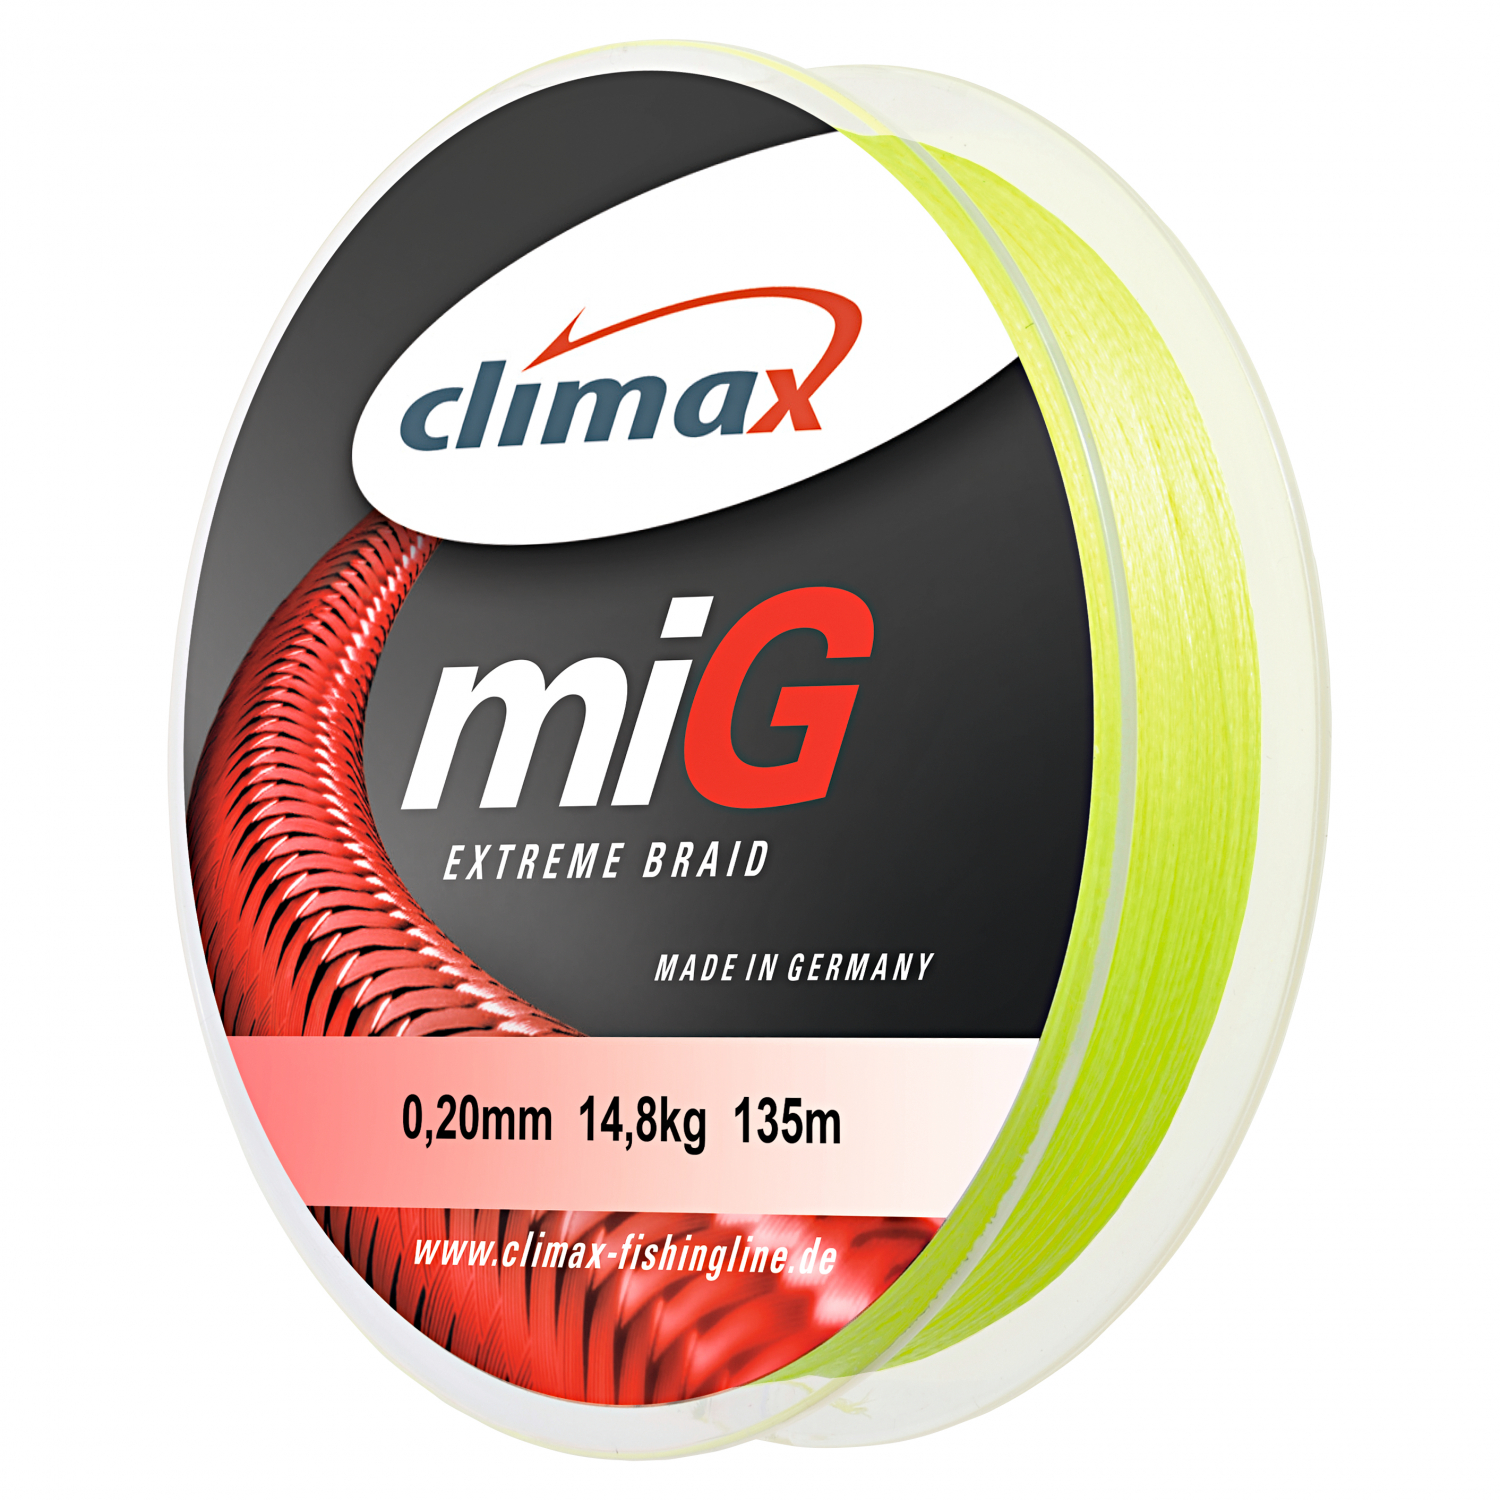 Climax Climax miG Fishing Line (300 m, neon yellow) 